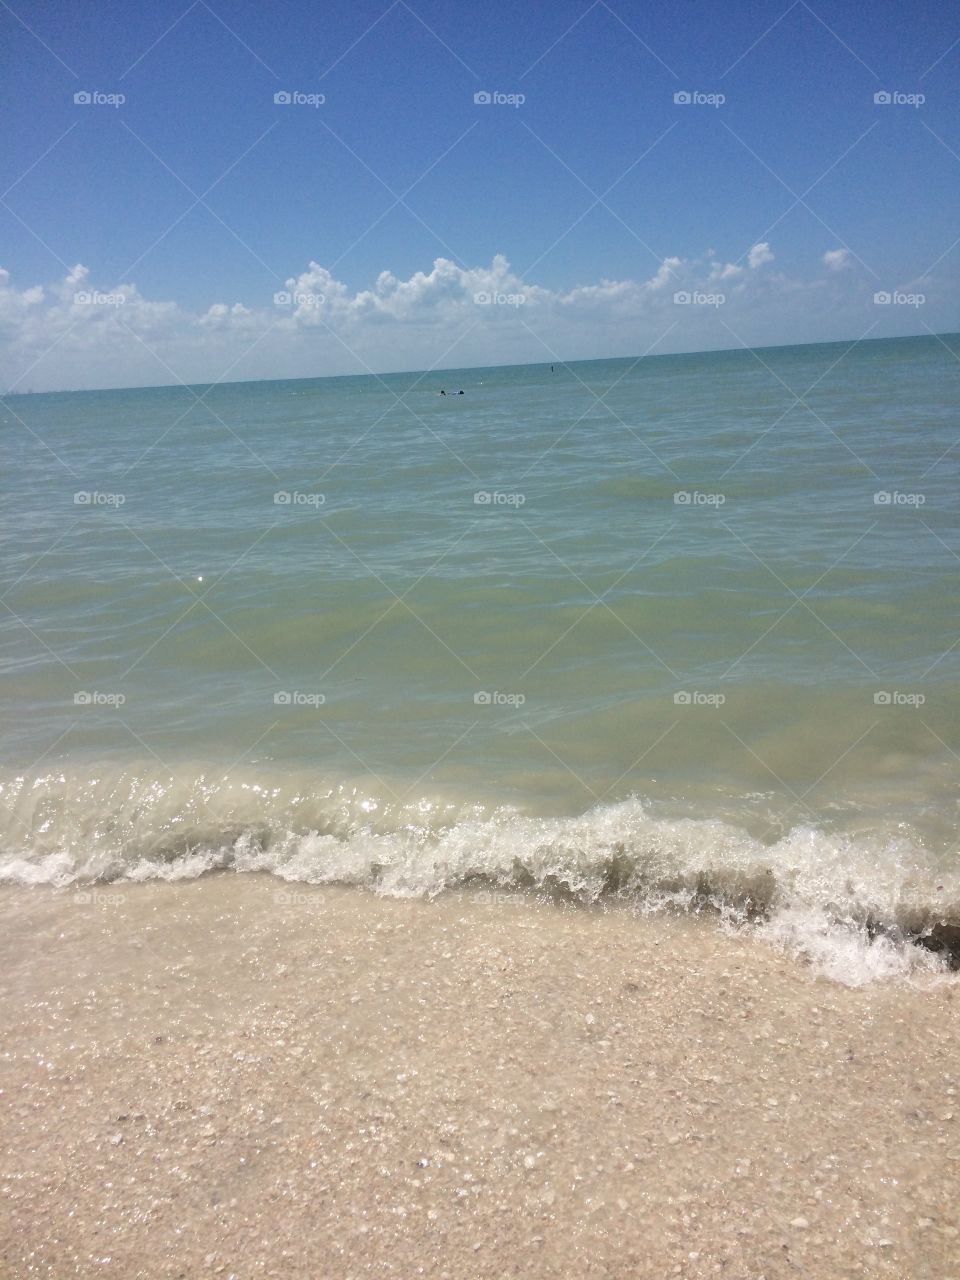 Vacation Ocean. I took this photo while on vacation in Sanibelle Island. 